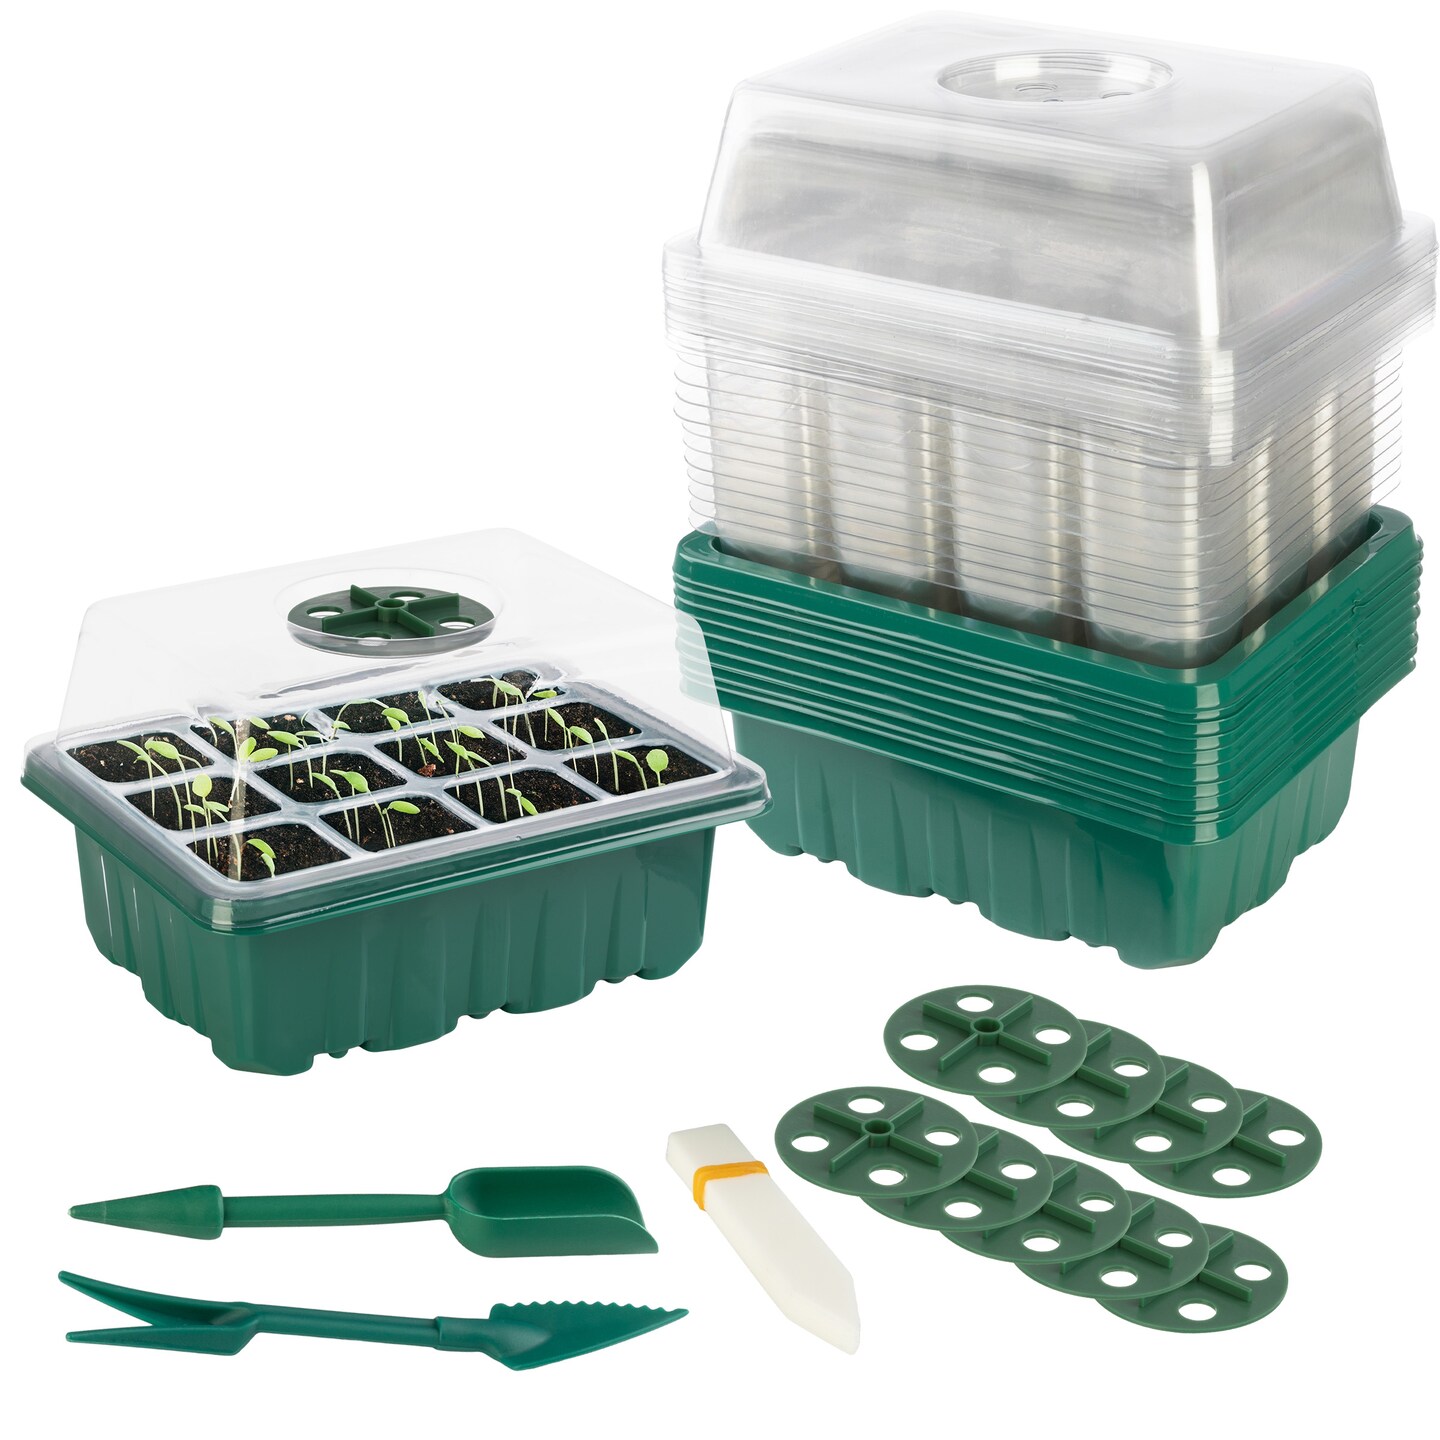 Home-Complete Seed Starter Tray 10-Pack - Plant Trays with Adjustable Humidity Domes - Seed Starting Kit with 120 Cells Total -